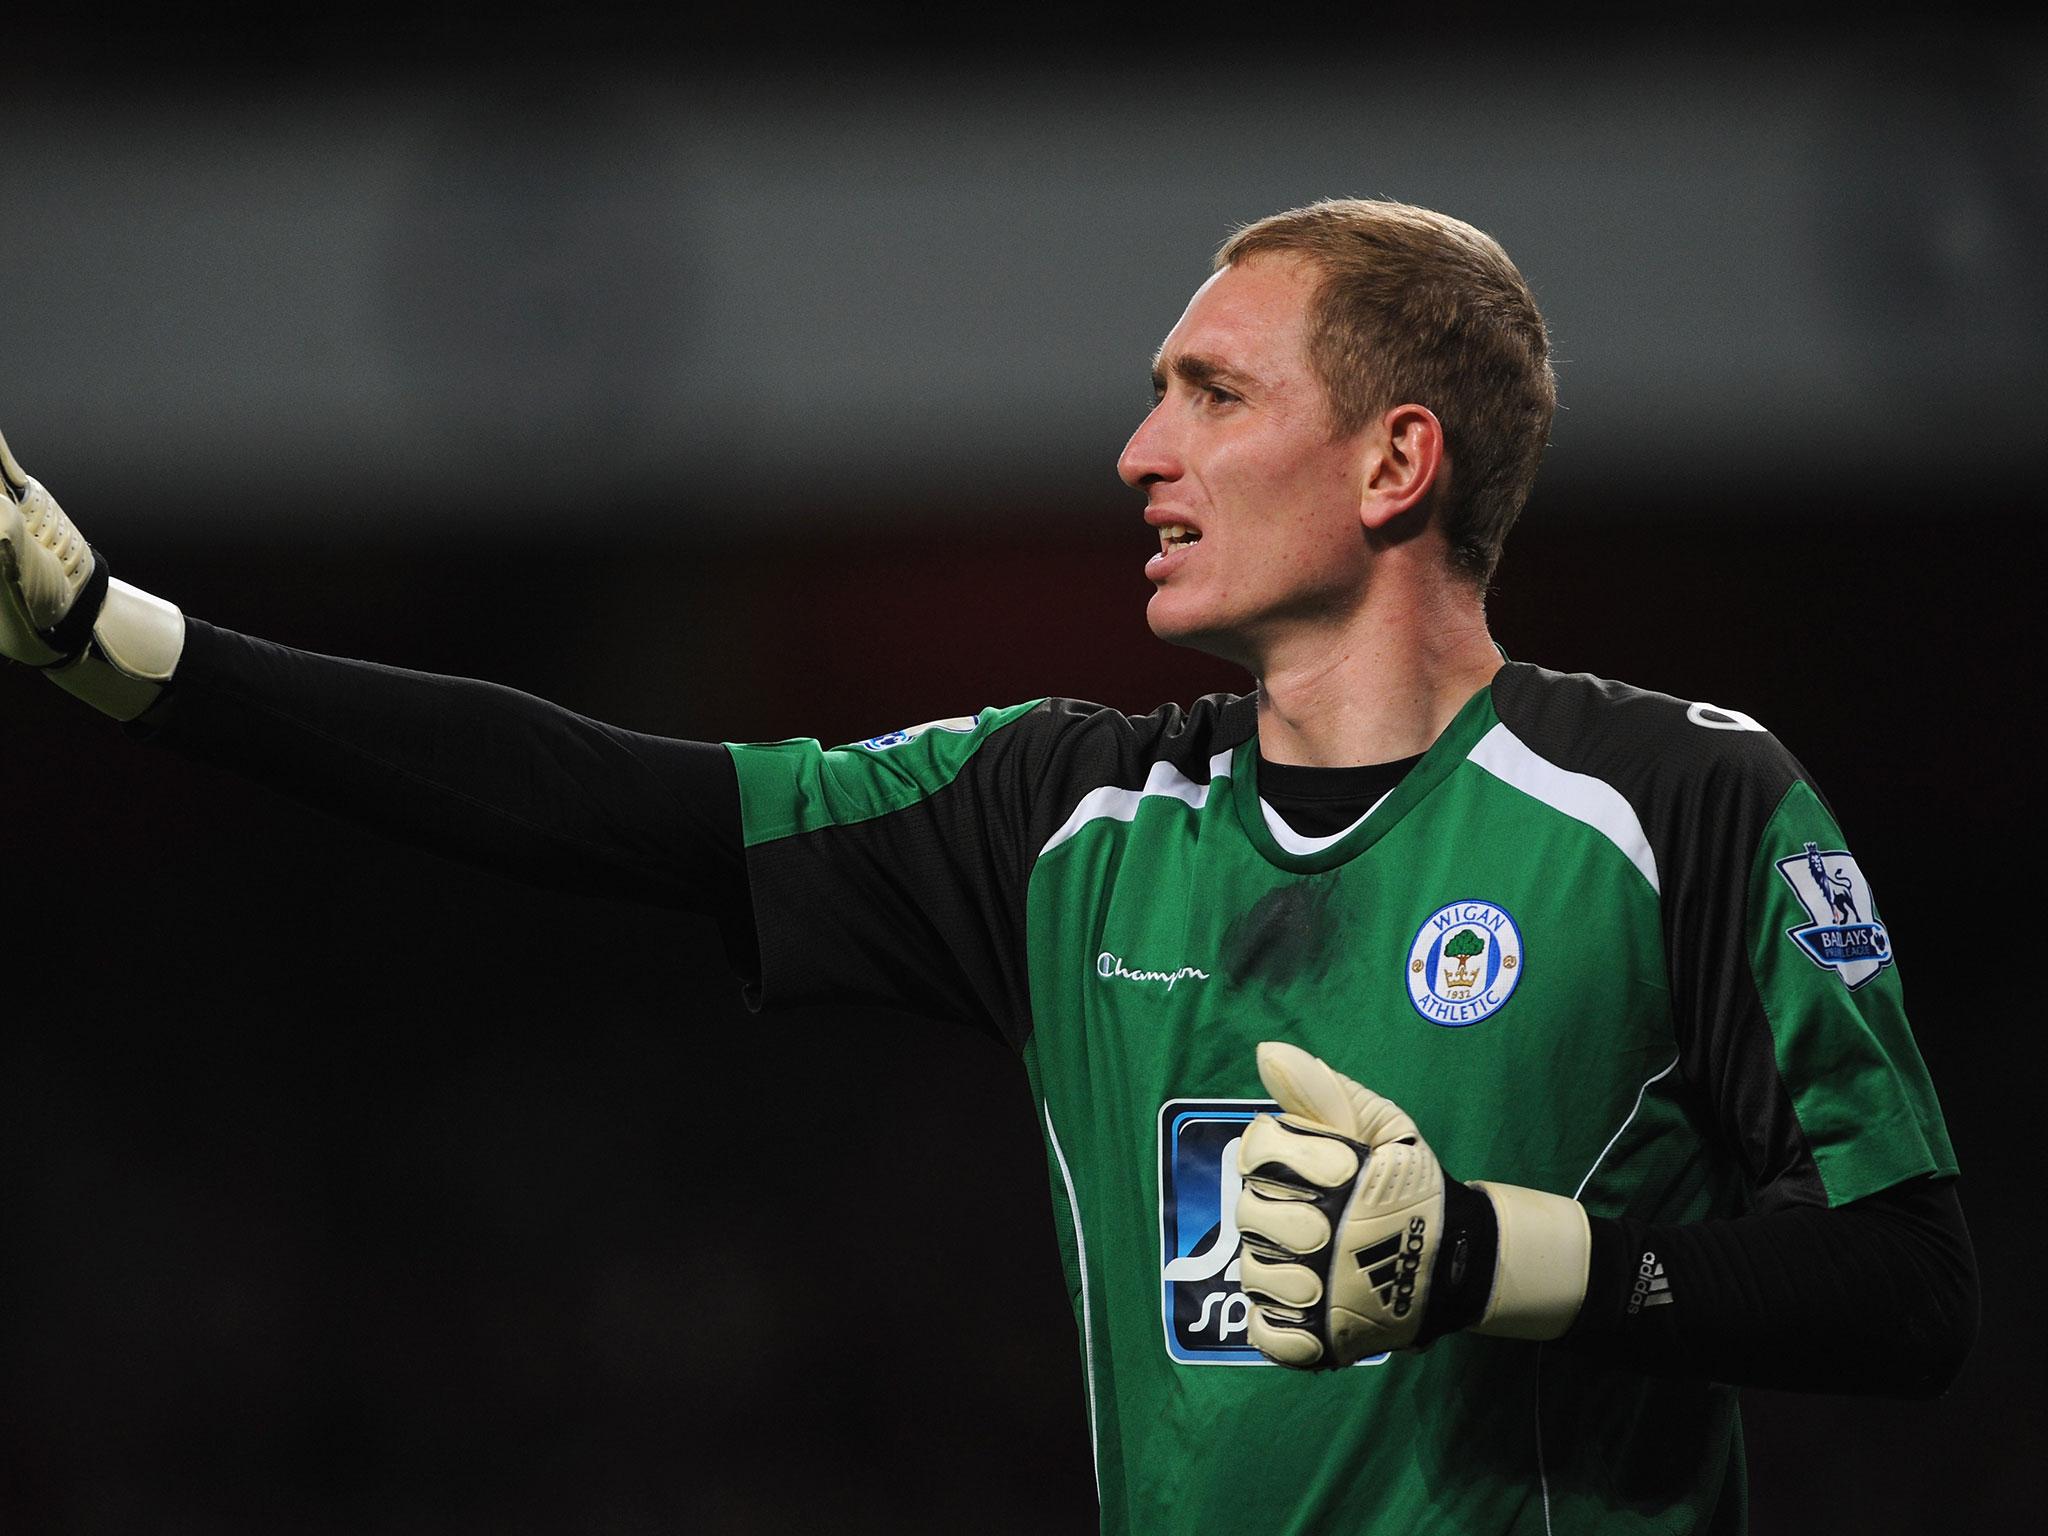 Chris Kirkland has opened up about his battle with depression